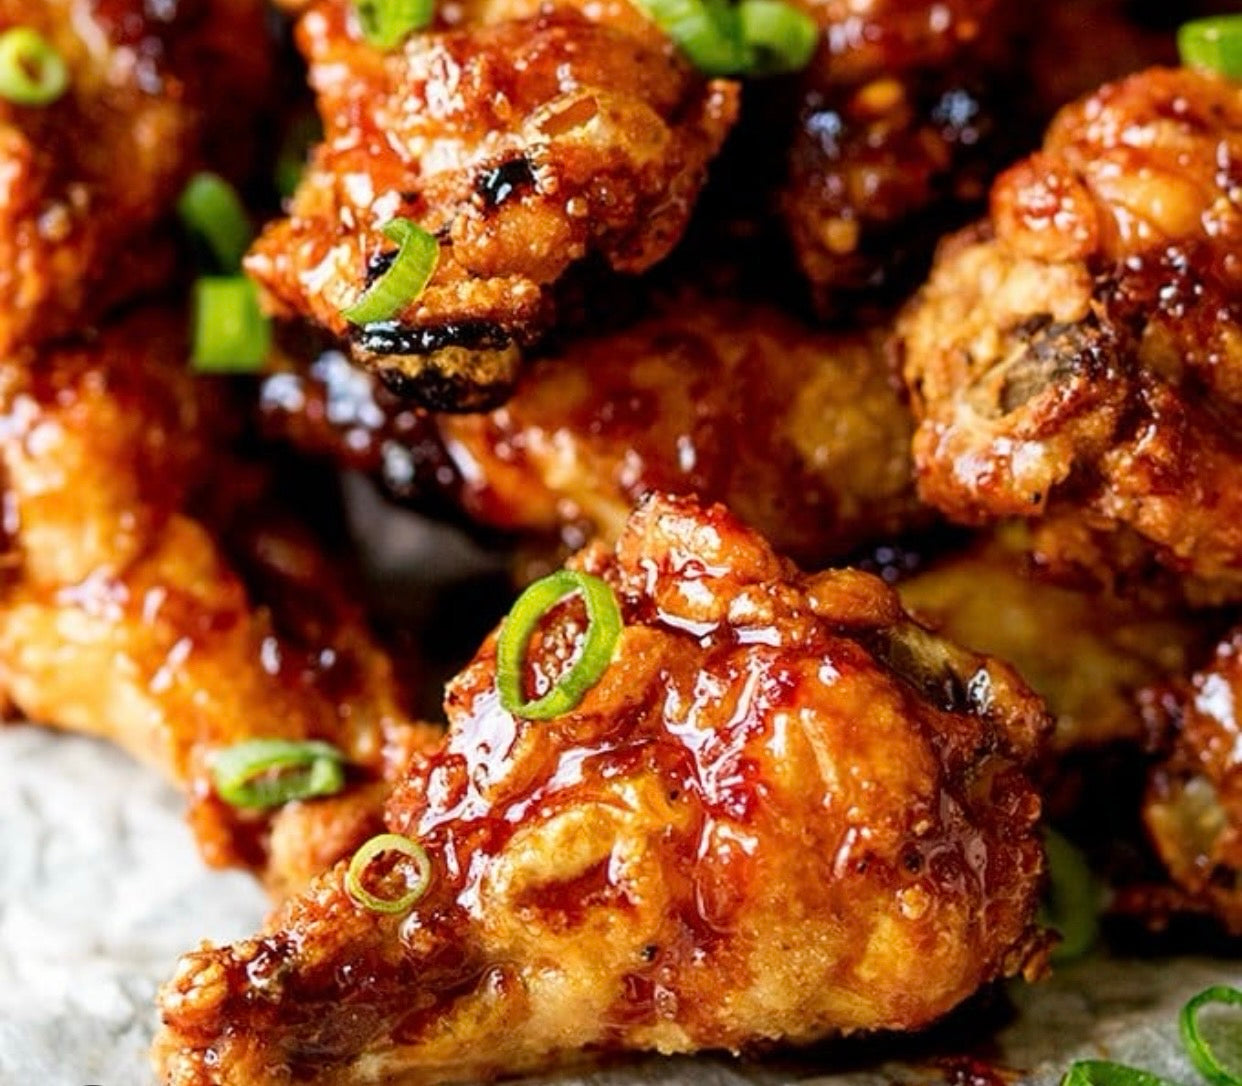 Chicken wings hot or mild